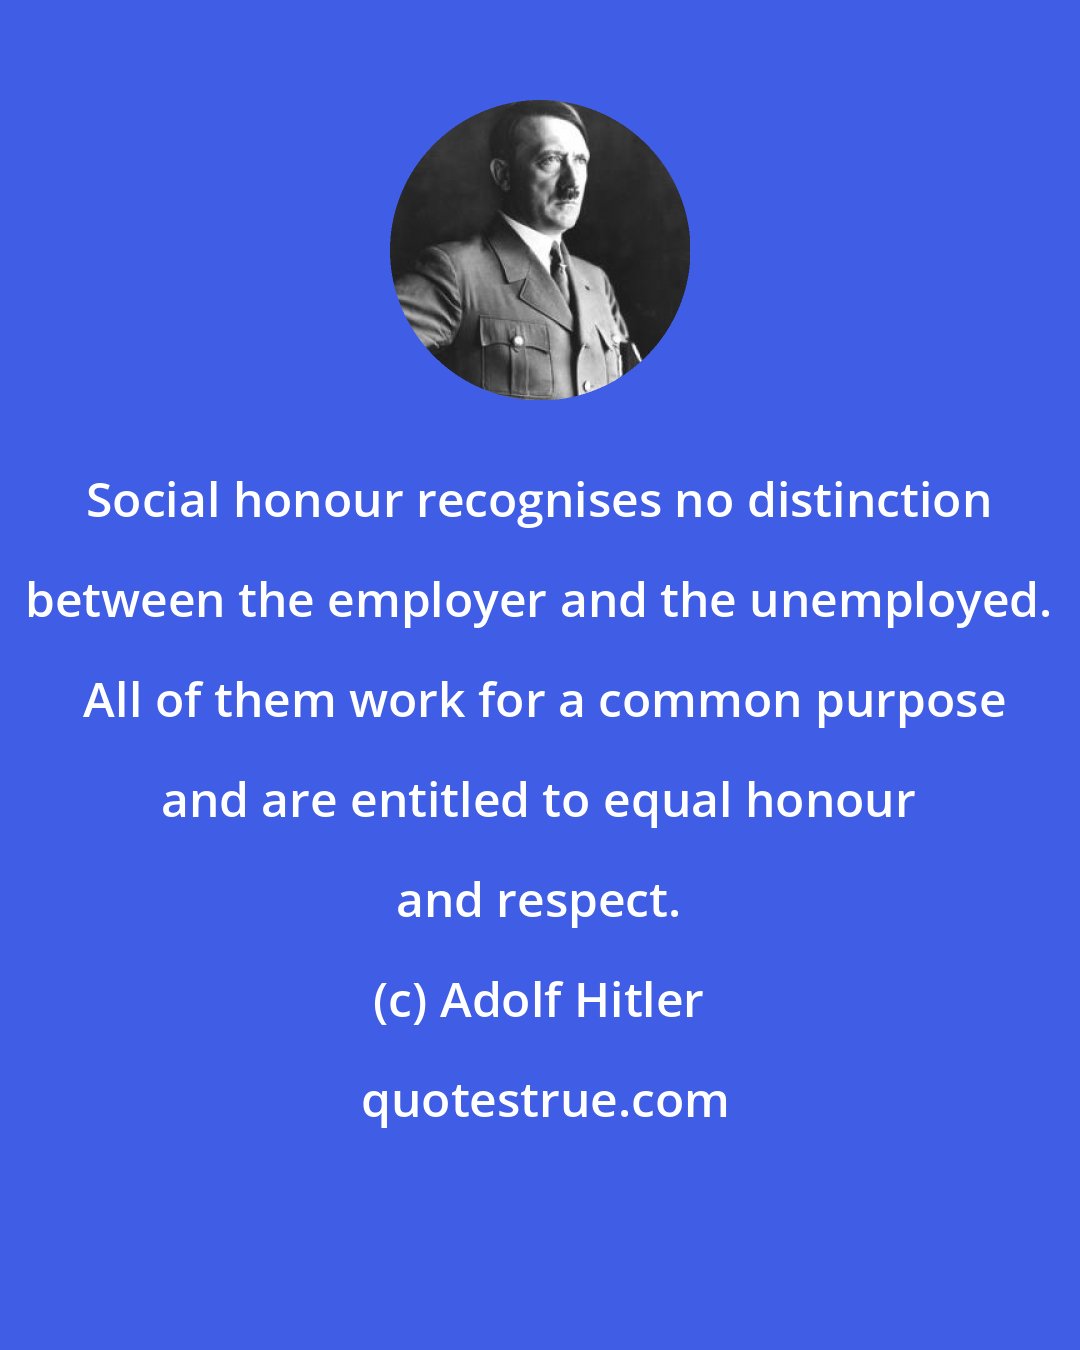 Adolf Hitler: Social honour recognises no distinction between the employer and the unemployed.  All of them work for a common purpose and are entitled to equal honour and respect.